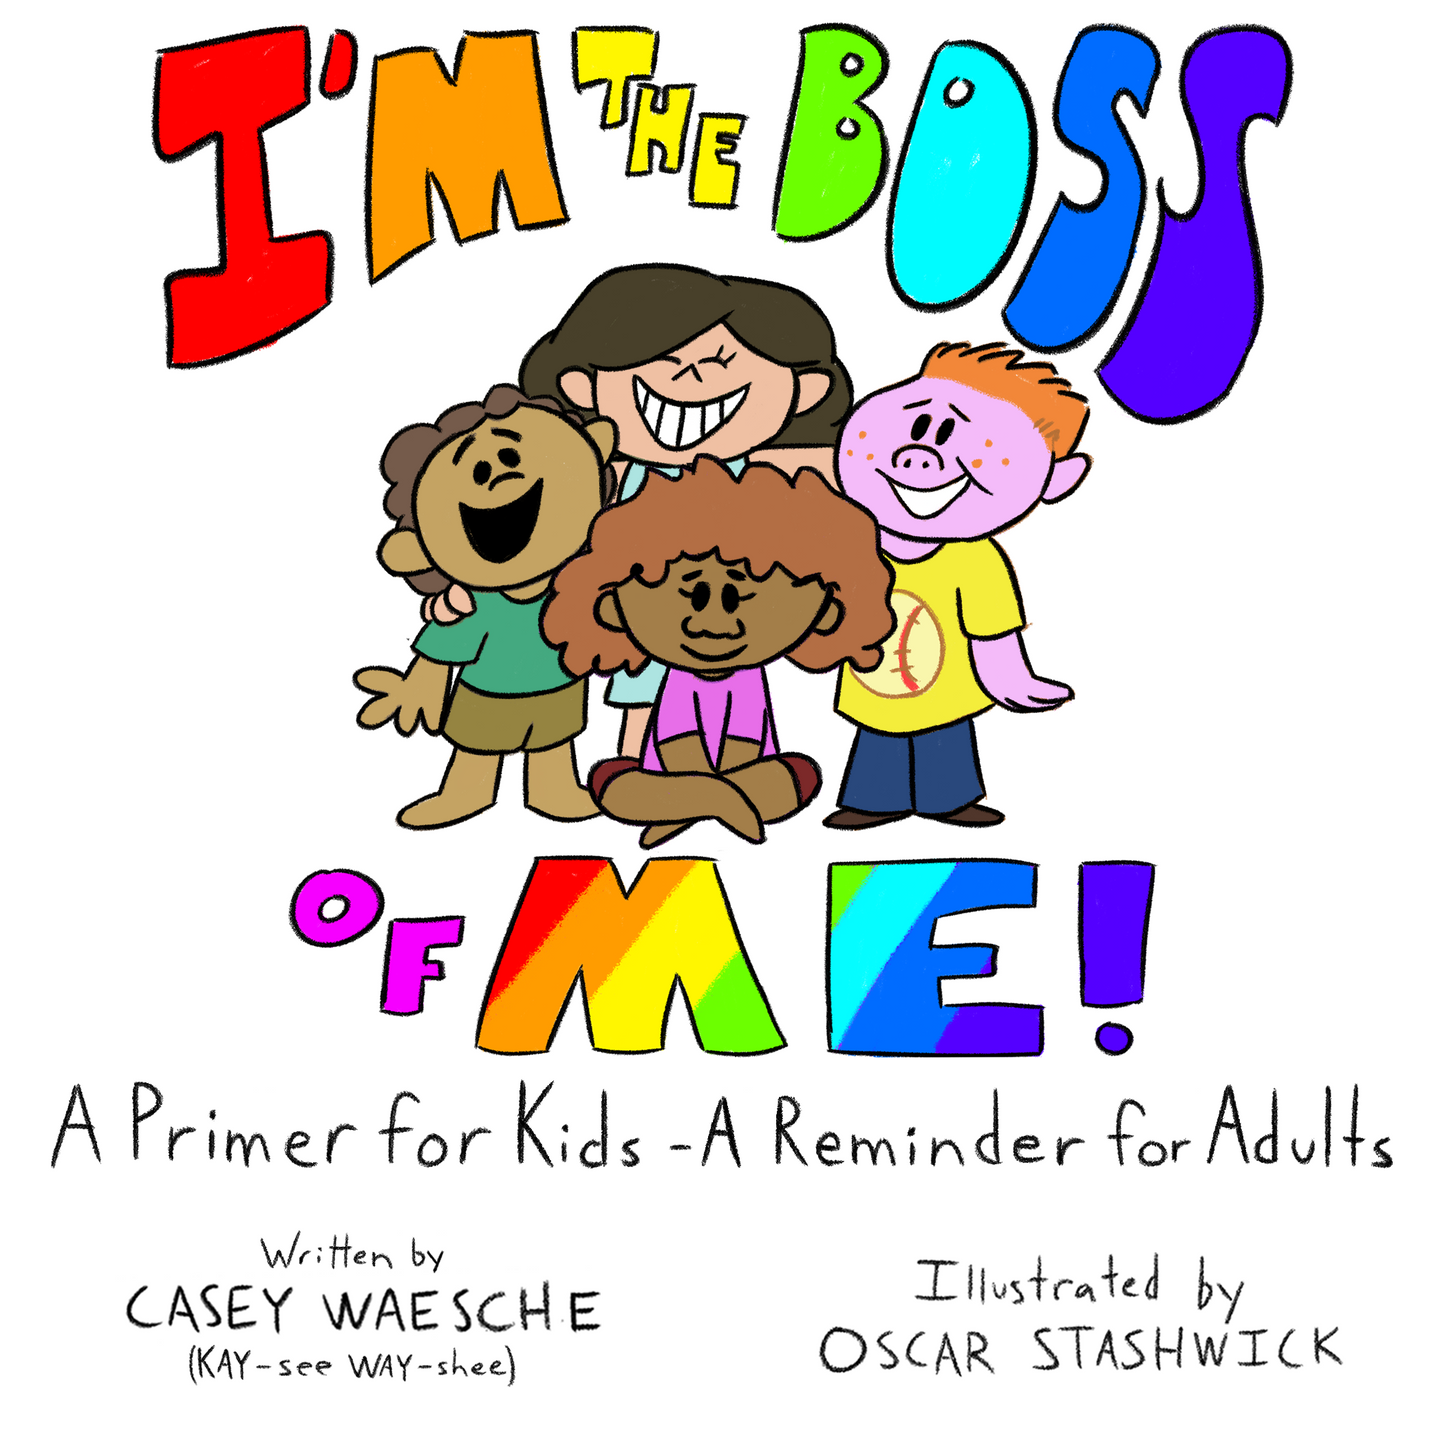 I’m The Boss Of Me®, A Primer for Kids - A Reminder for Adults